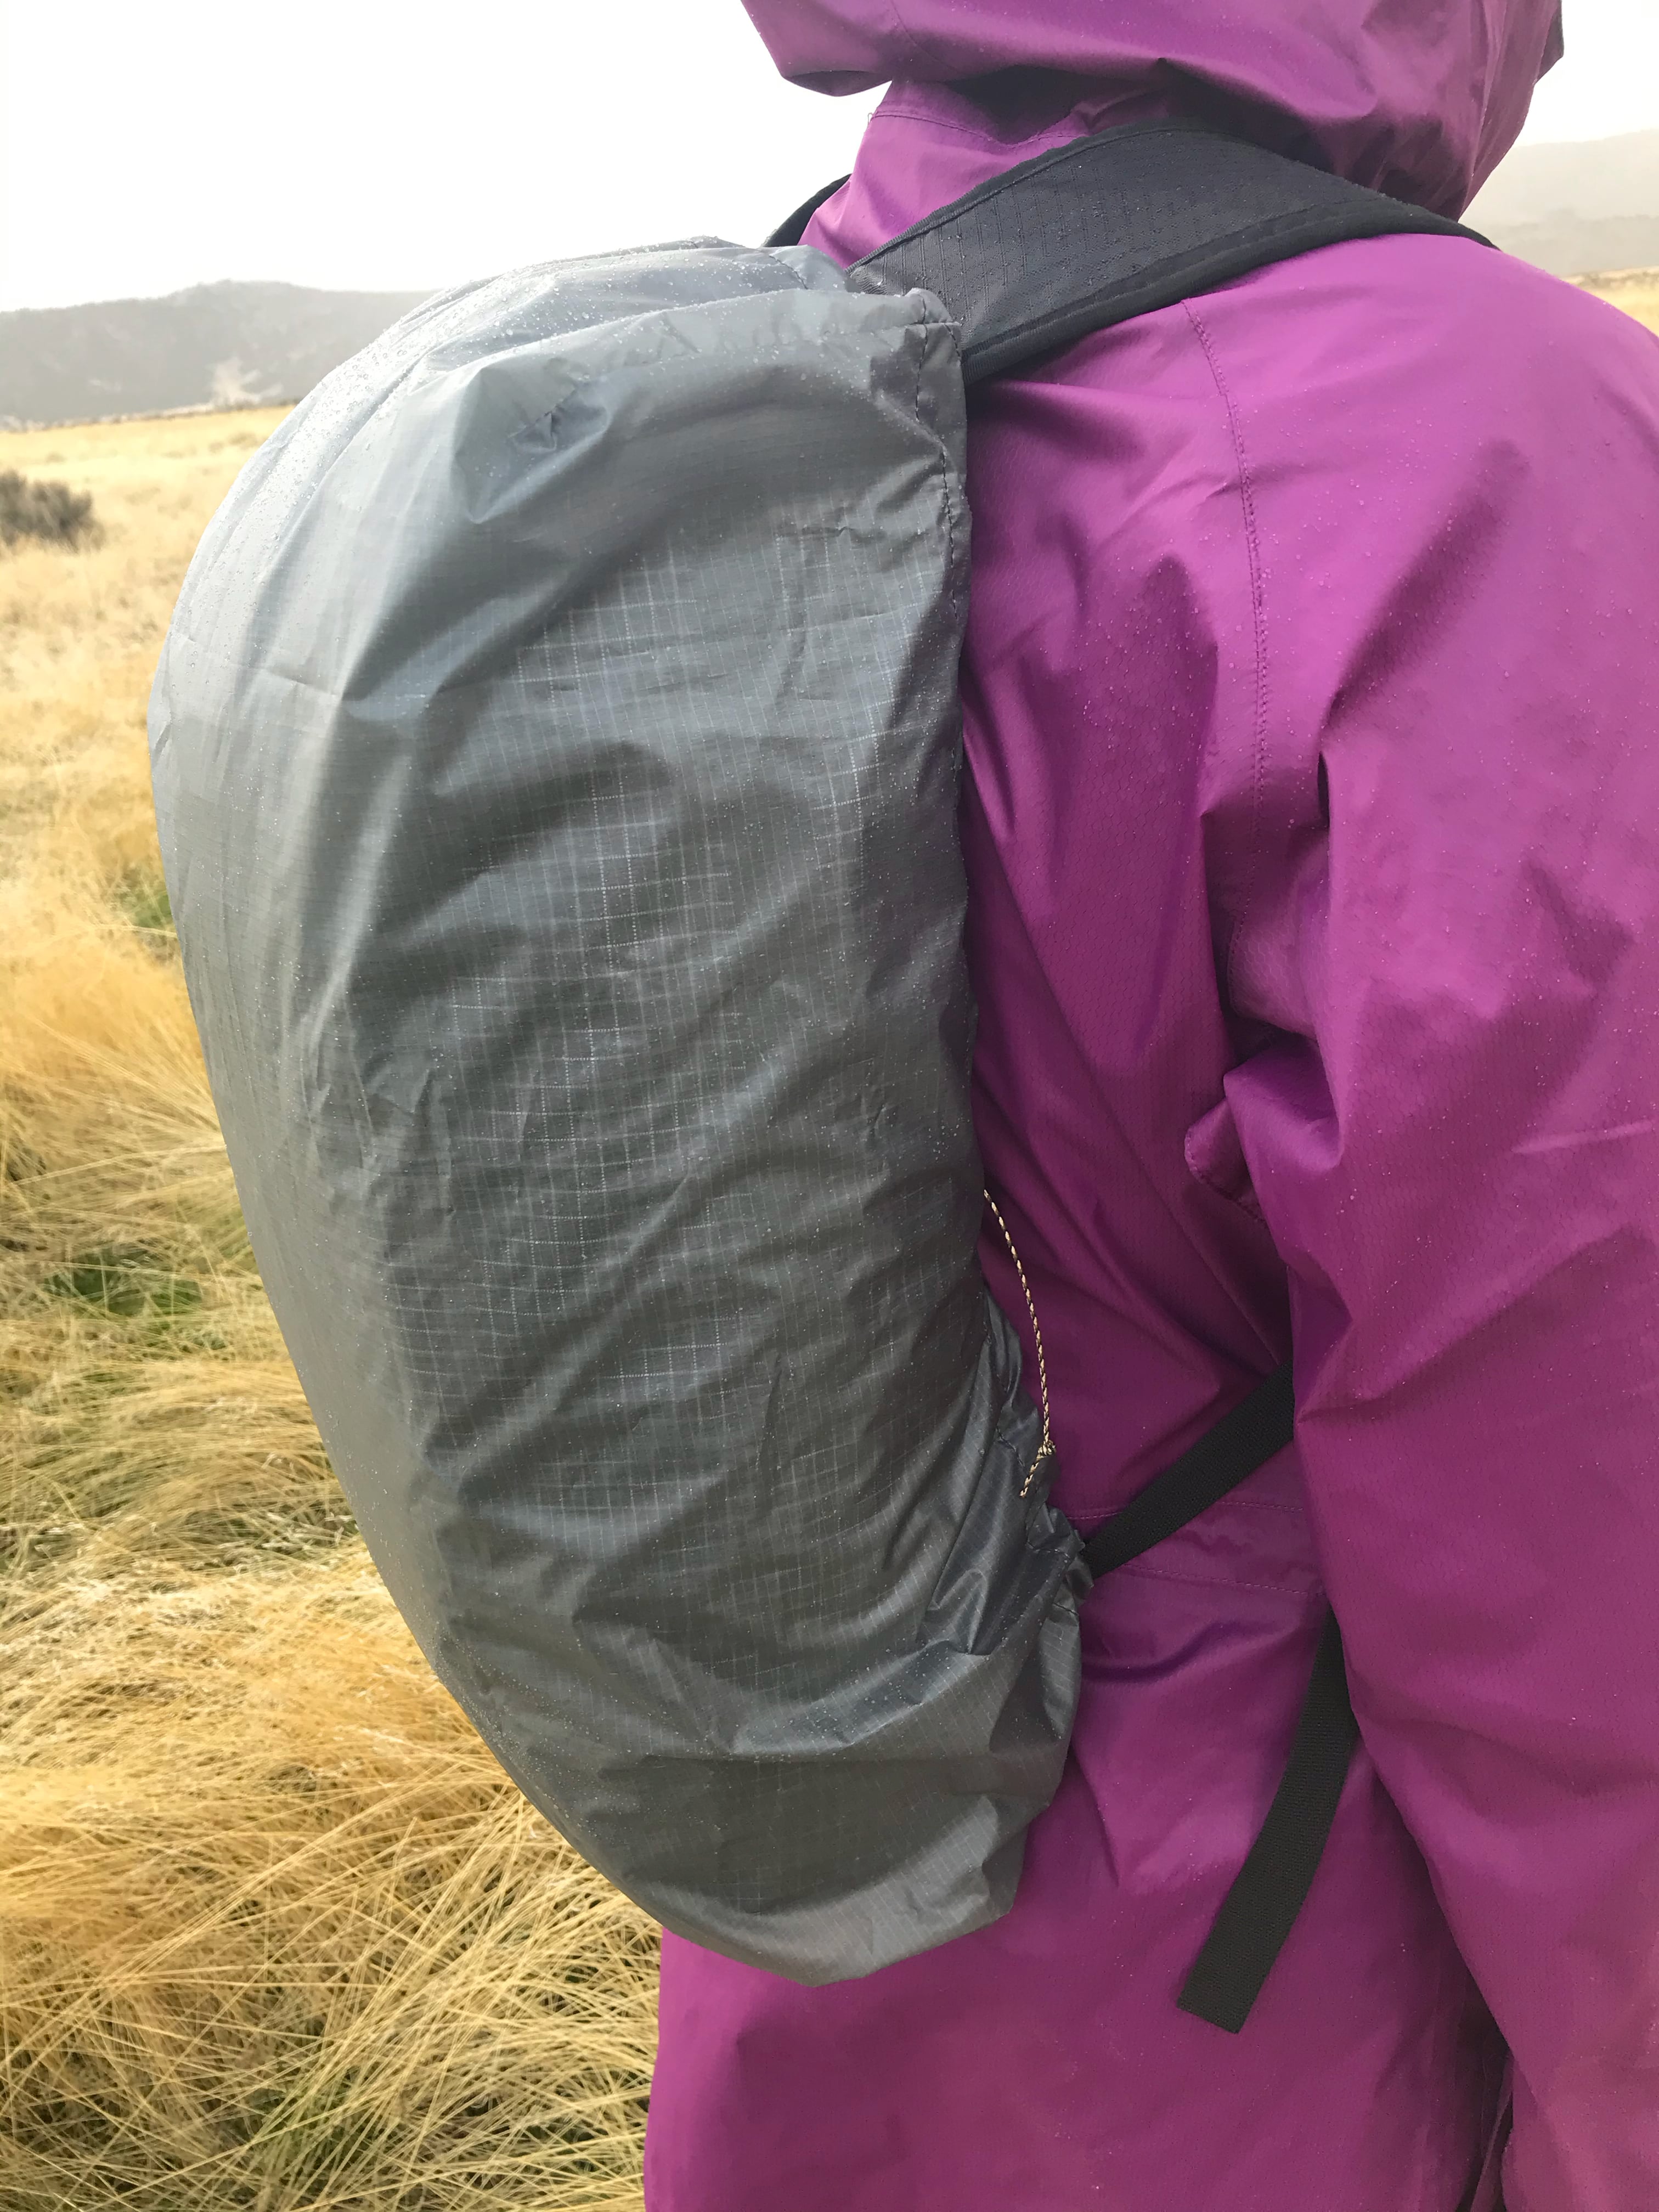 View of a DIY sewing pattern for a rain cover for backpack being used outside